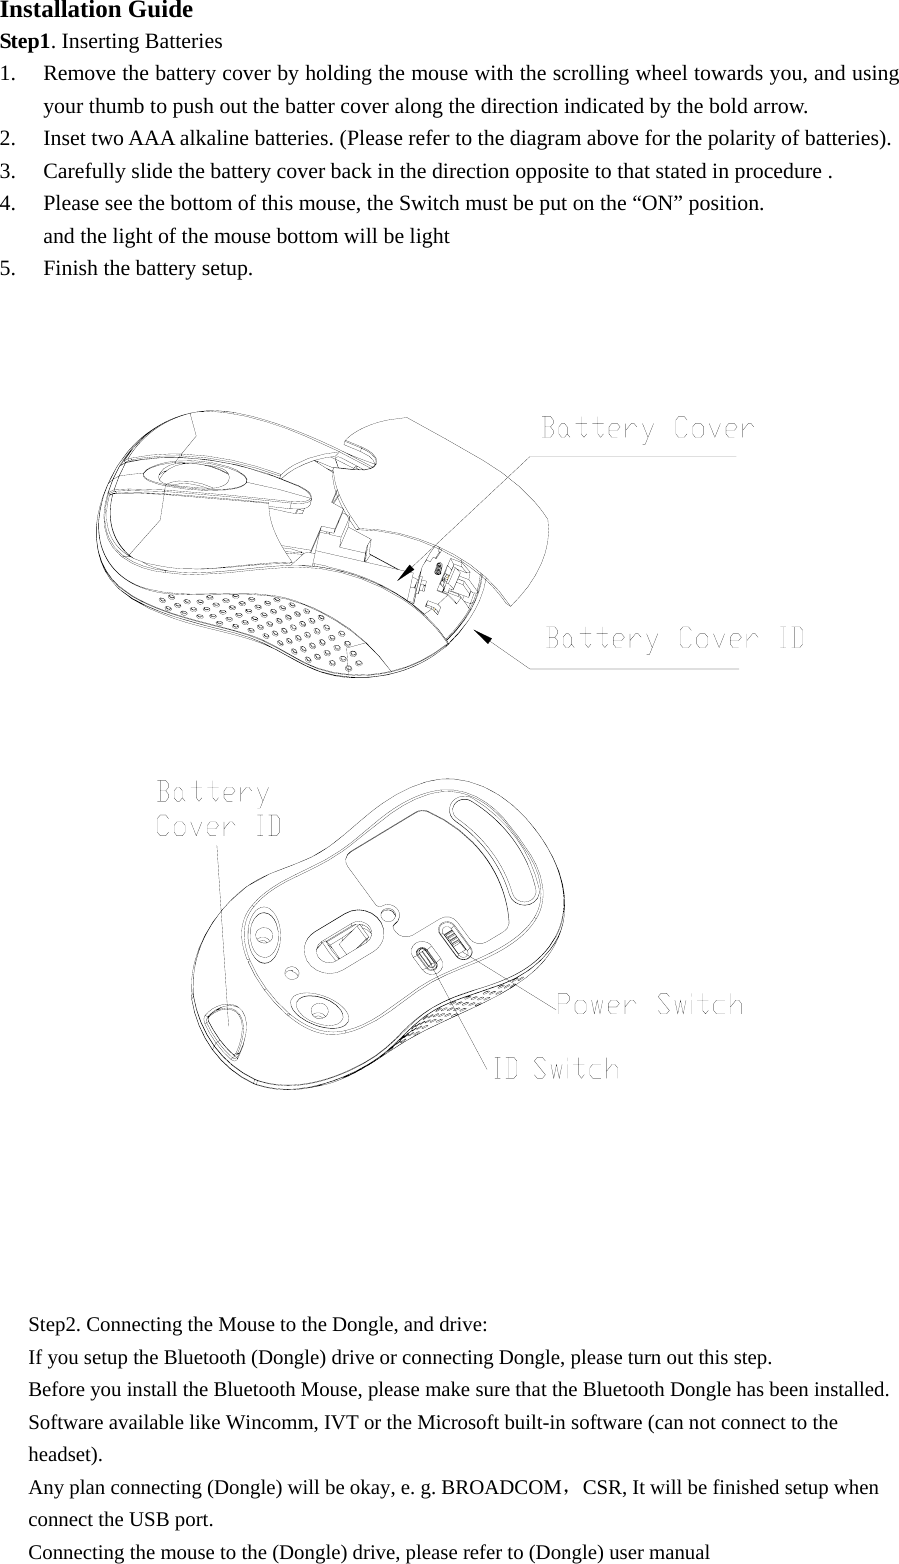 Installation Guide Step1. Inserting Batteries 1. Remove the battery cover by holding the mouse with the scrolling wheel towards you, and using your thumb to push out the batter cover along the direction indicated by the bold arrow. 2. Inset two AAA alkaline batteries. (Please refer to the diagram above for the polarity of batteries). 3. Carefully slide the battery cover back in the direction opposite to that stated in procedure . 4. Please see the bottom of this mouse, the Switch must be put on the “ON” position.   and the light of the mouse bottom will be light 5. Finish the battery setup.        Step2. Connecting the Mouse to the Dongle, and drive: If you setup the Bluetooth (Dongle) drive or connecting Dongle, please turn out this step. Before you install the Bluetooth Mouse, please make sure that the Bluetooth Dongle has been installed. Software available like Wincomm, IVT or the Microsoft built-in software (can not connect to the headset). Any plan connecting (Dongle) will be okay, e. g. BROADCOM，CSR, It will be finished setup when connect the USB port. Connecting the mouse to the (Dongle) drive, please refer to (Dongle) user manual   